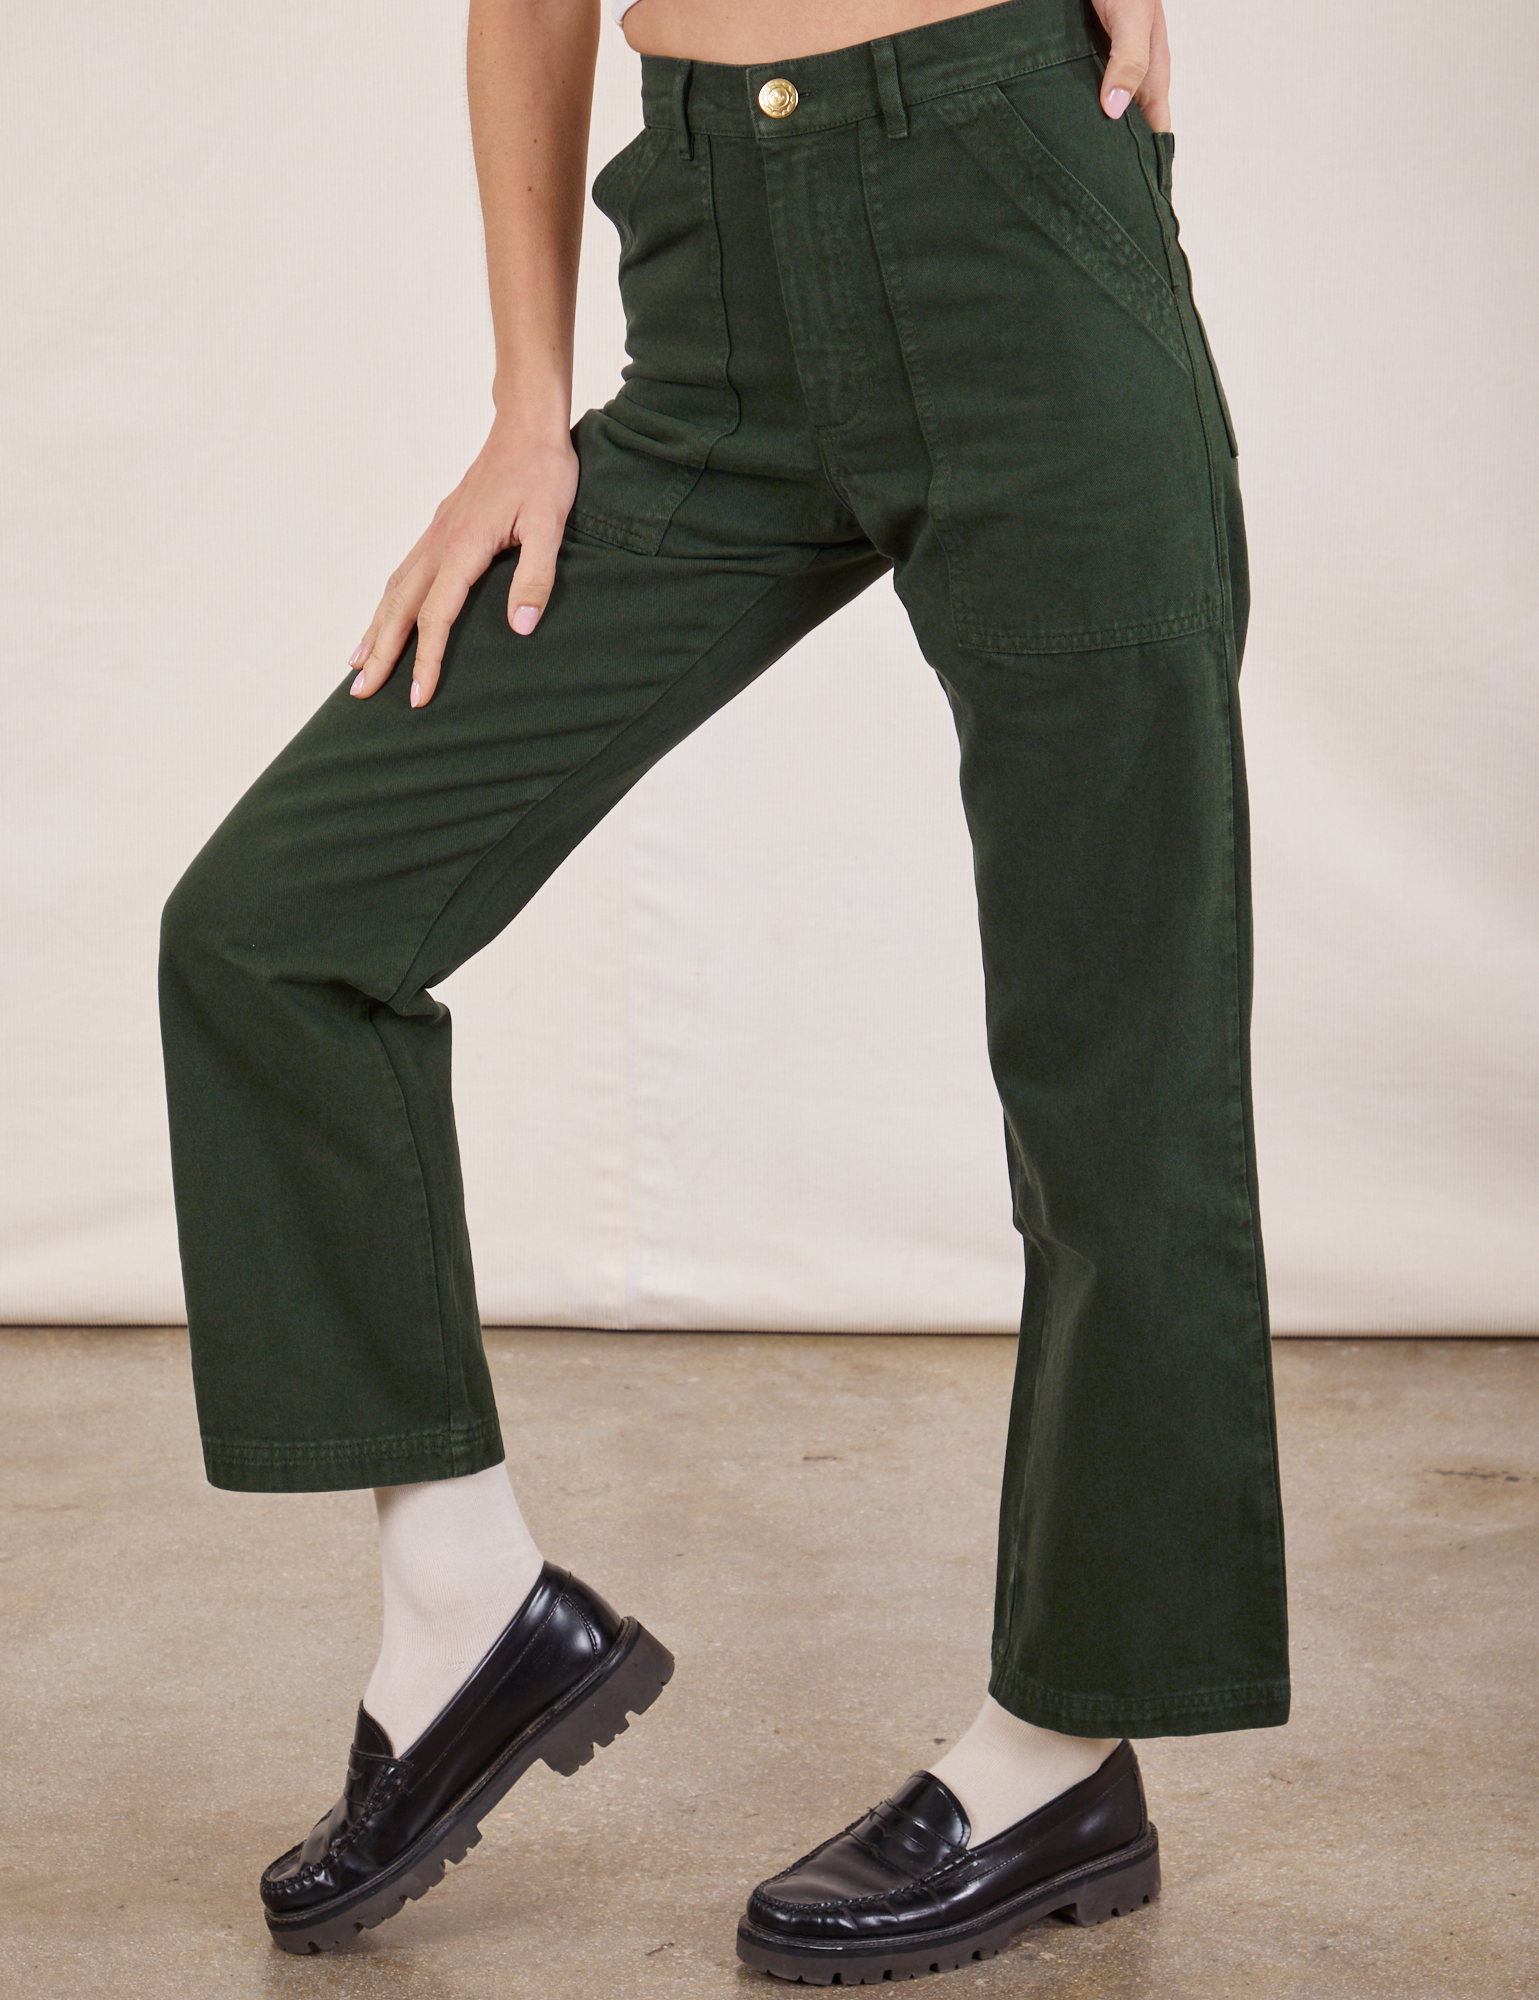 Work Pants in Swamp Green pant leg close up on Madeline